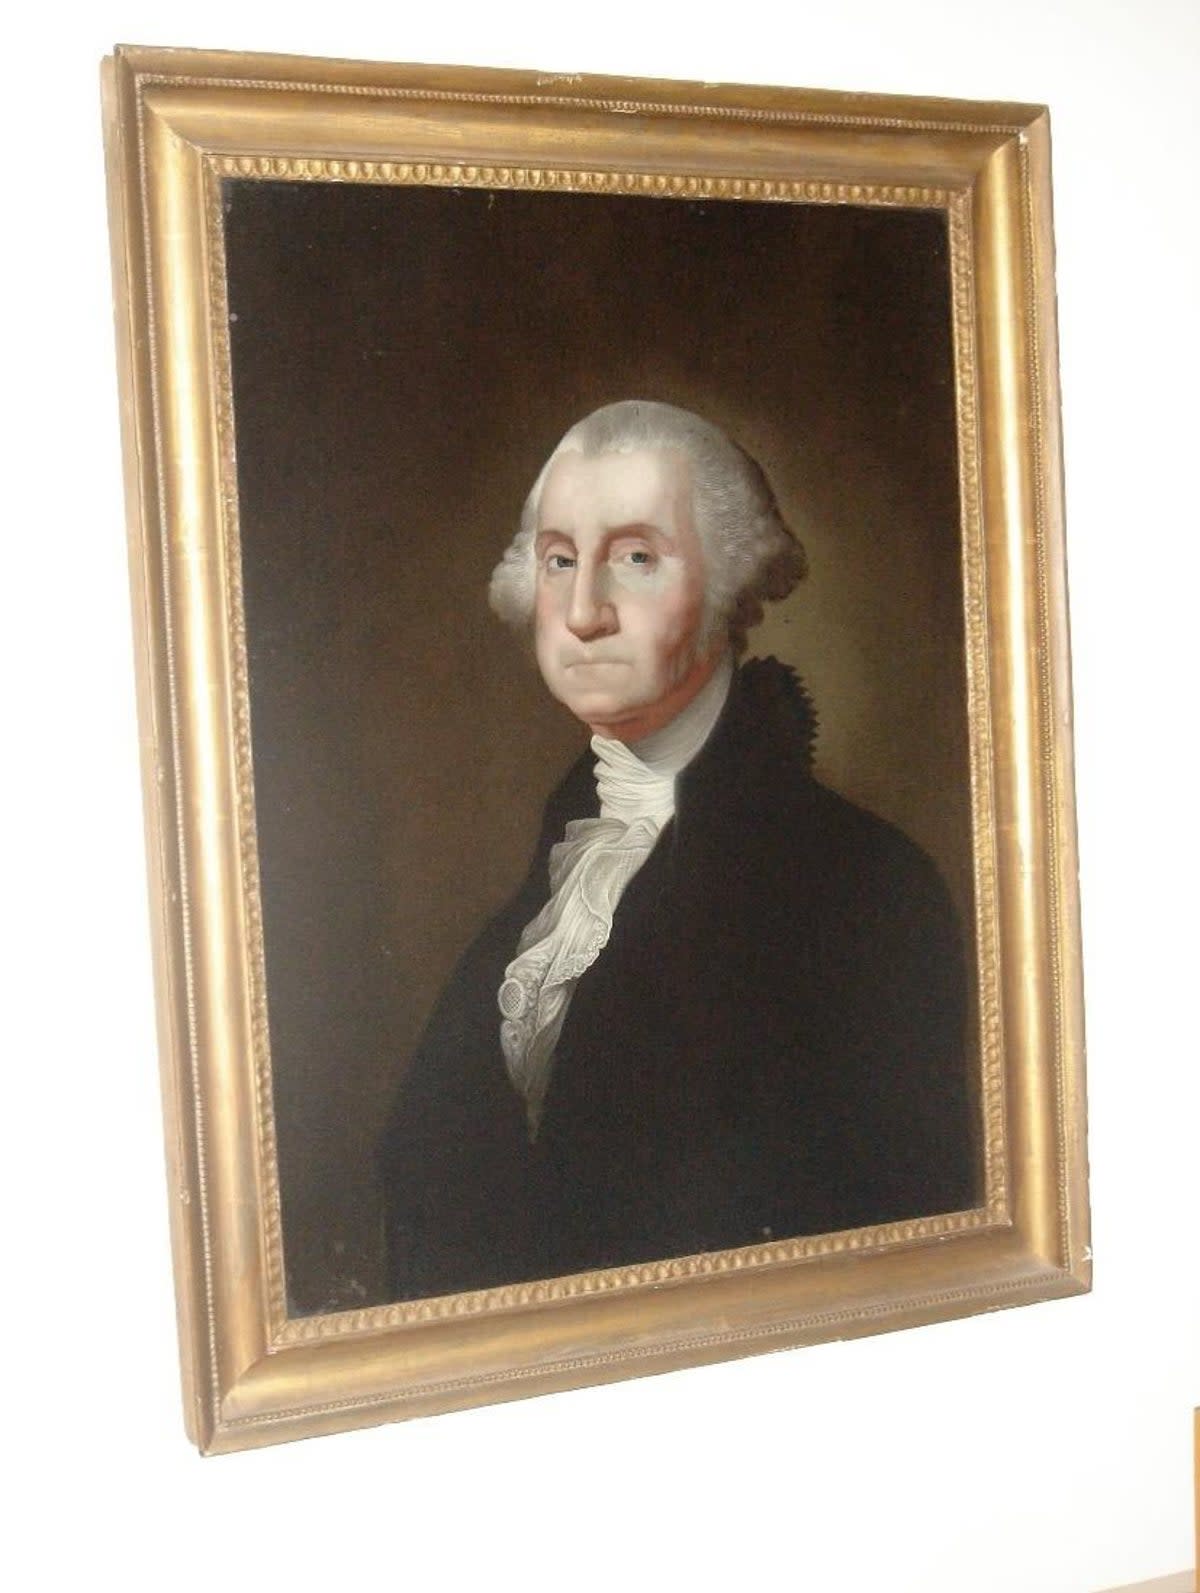 A portrait of George Washington kept in a storage facility has been stolen in Colorado  (Englewood Police Department)